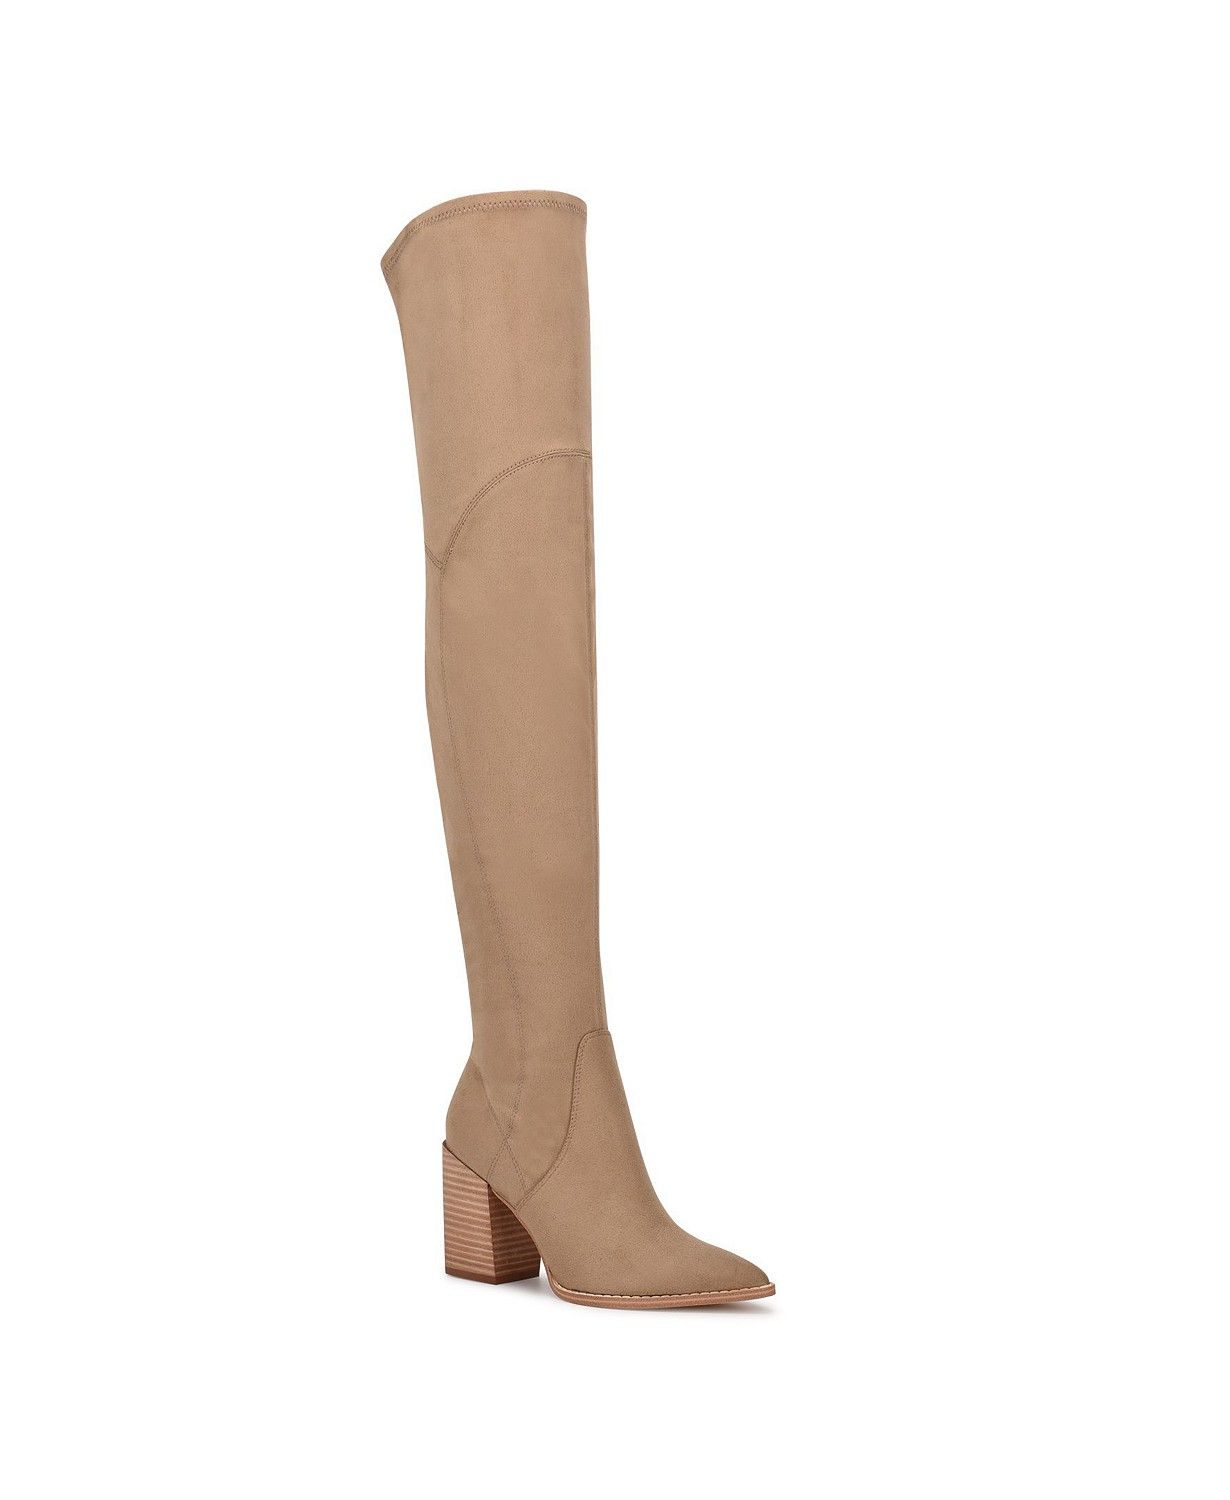 Nine West Women's Barret Over The Knee Heeled Boots & Reviews - Boots - Shoes - Macy's | Macys (US)